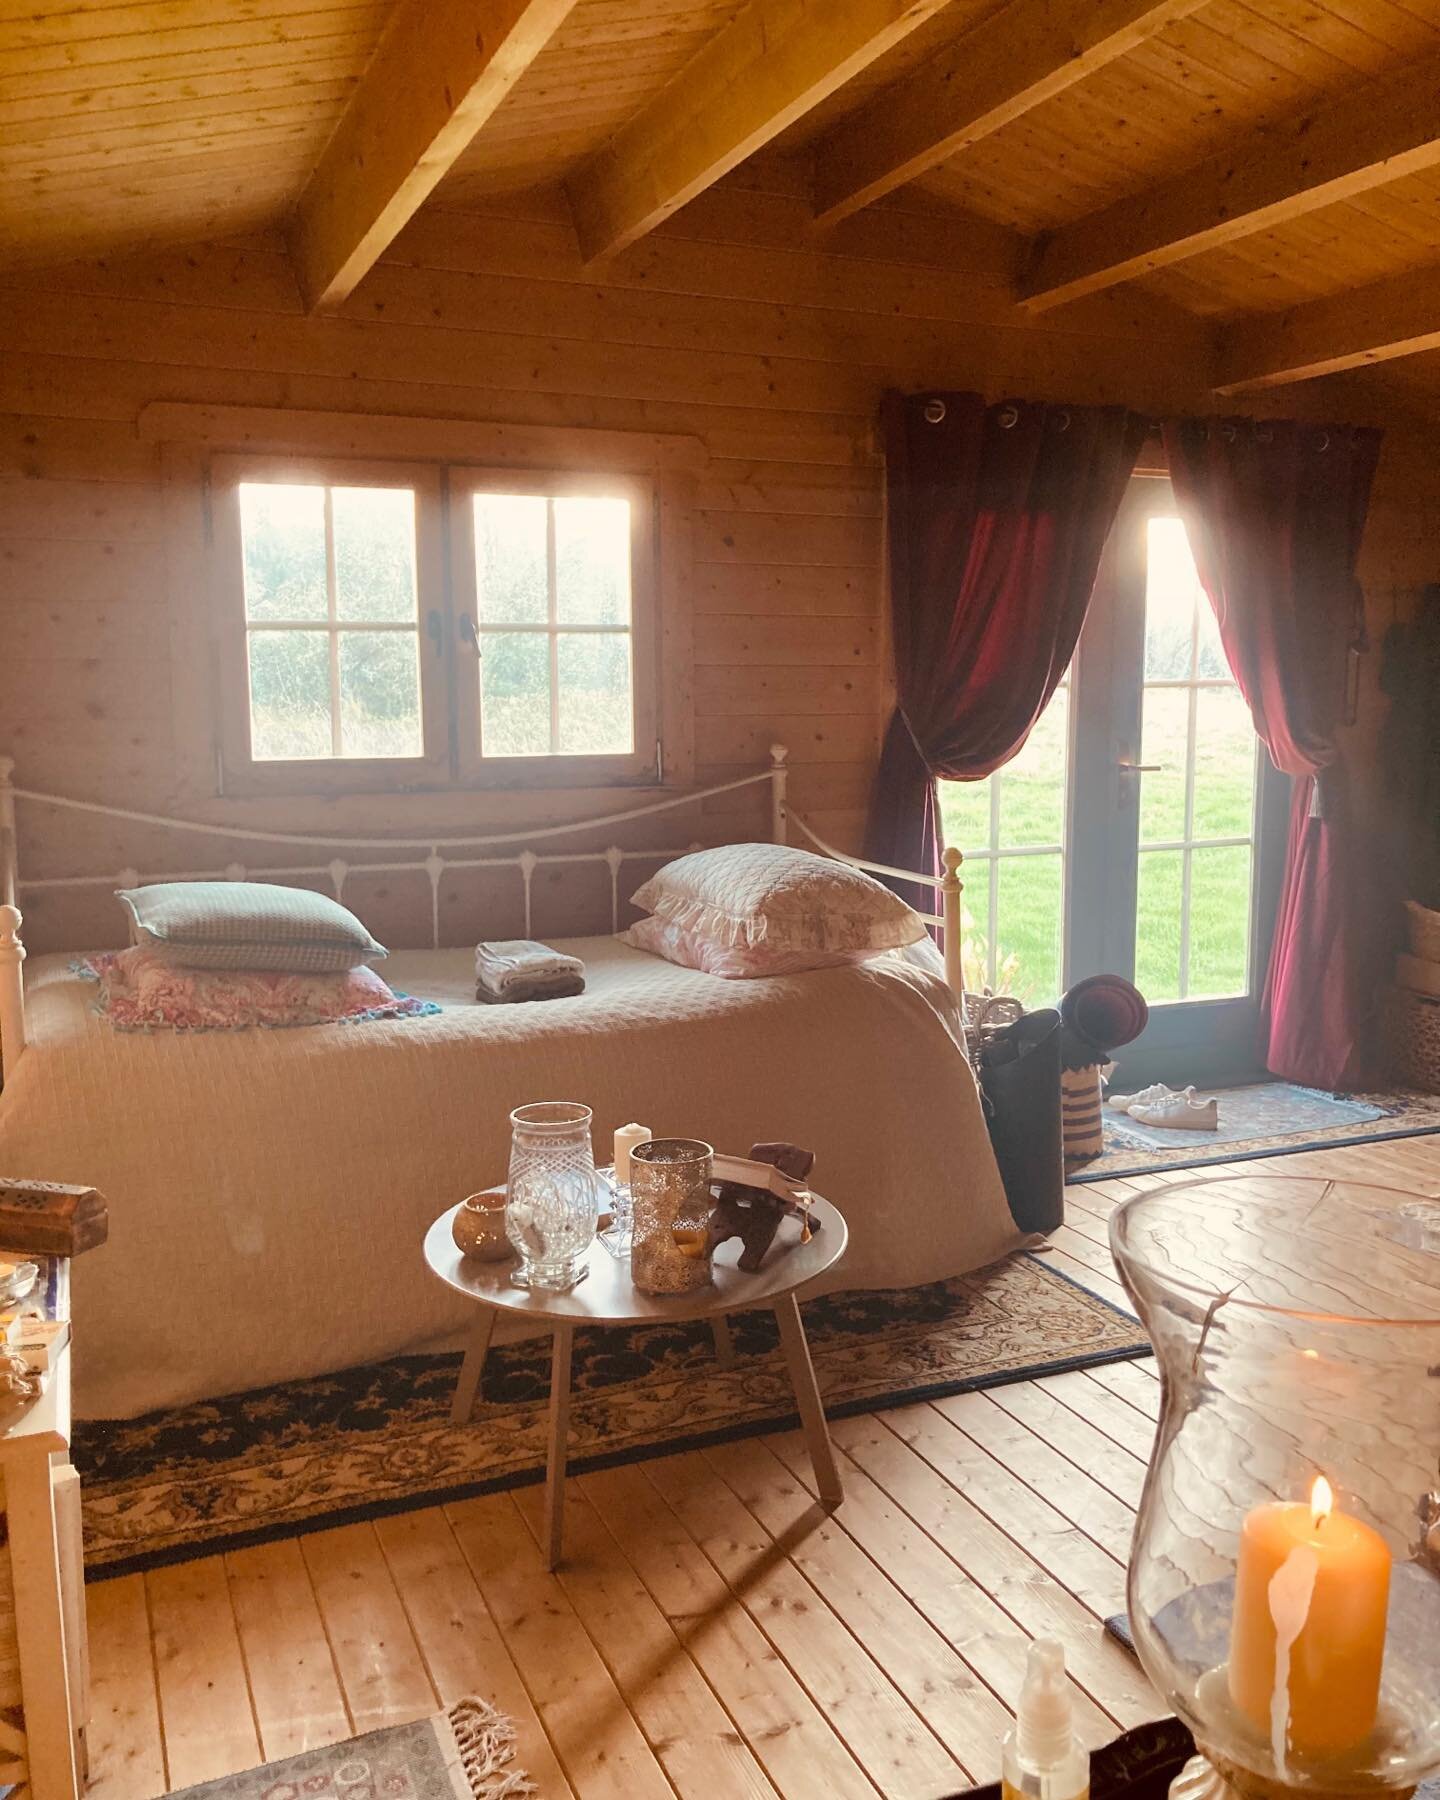 Light is wild here at #thewillowretreat today 🙏🏻😇 It&rsquo;s a great day for sitting in a cabin on retreat reading, drinking tea &amp; relaxing ⭐️ Great to be back 🏵 

#beyondyoga #live#love#yoga#meditation#galway #ireland